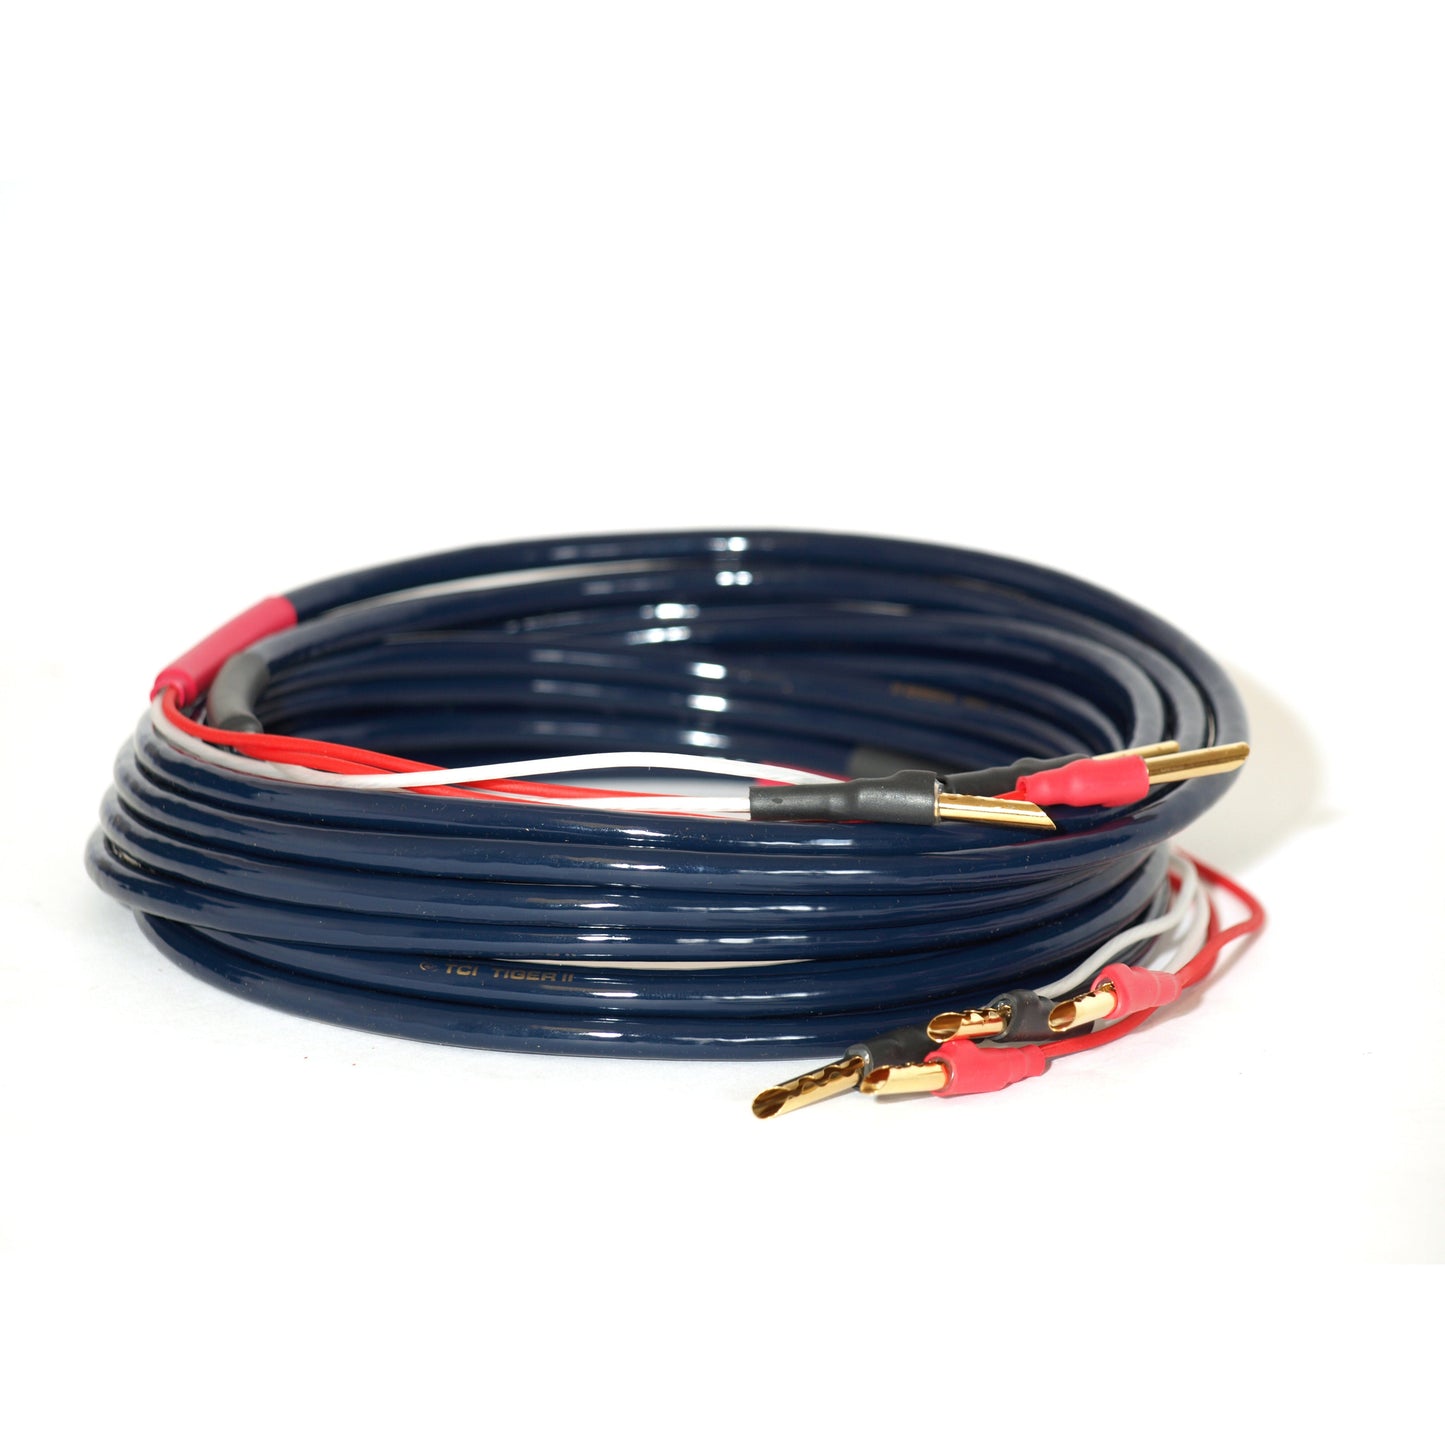 True Colours (TCI) Tiger II Stereo Speaker Cable